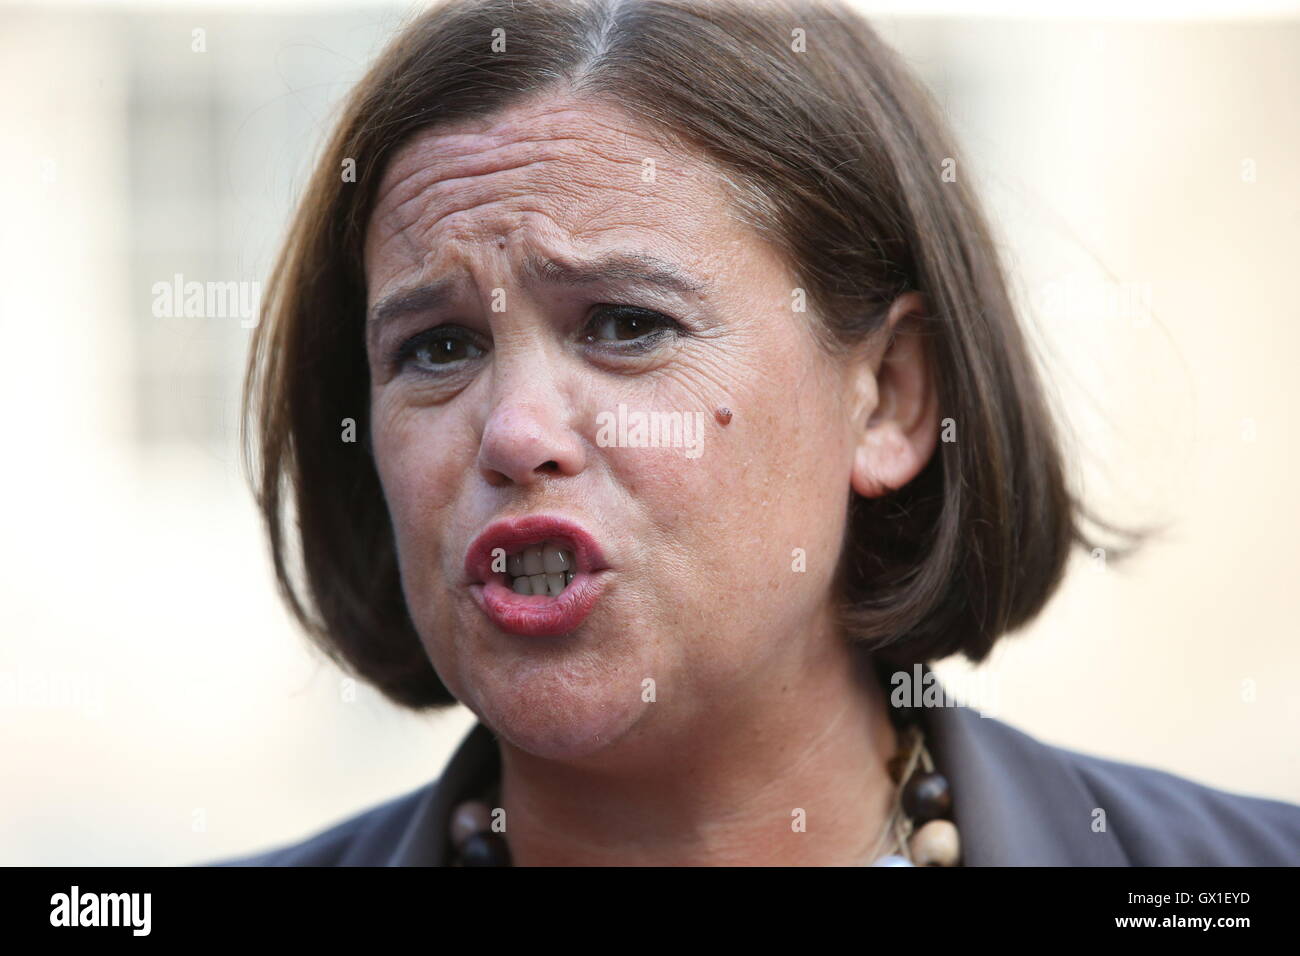 Sinn FÂŽin Deputy Leader Mary Lou McDonald speaks in response to the Nama report, as the Irish government is to order an inquiry into the controversial &pound;1.2 billion sale of Northern Ireland property assets by bad bank Nama, outside Government buildings in Dublin. Stock Photo